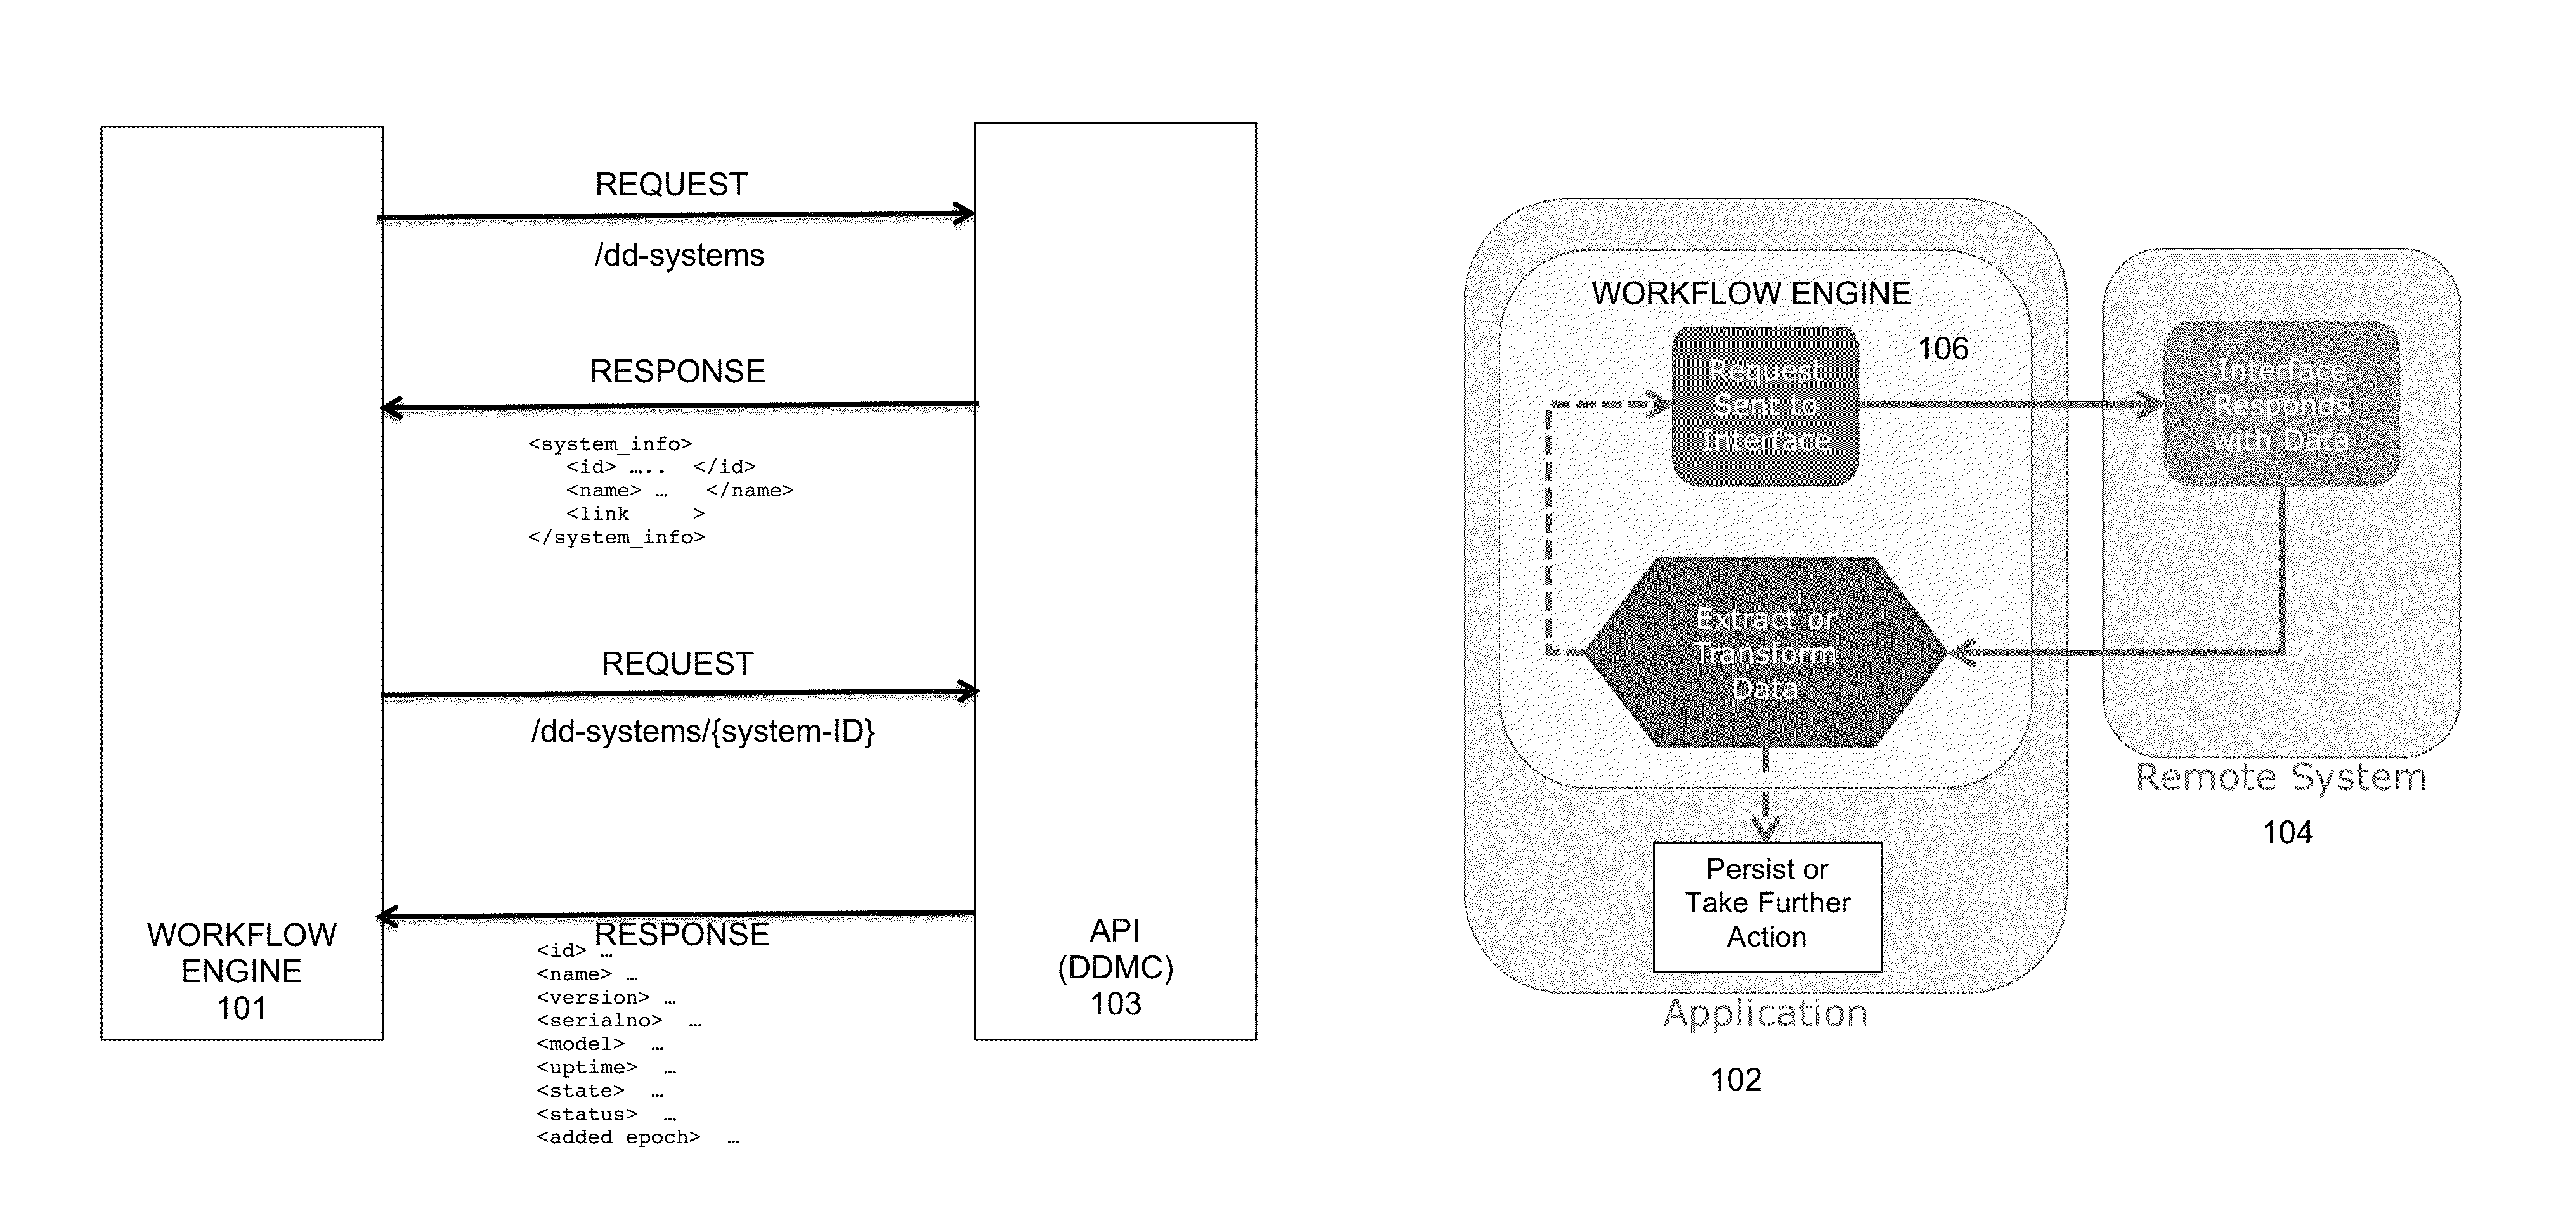 Execution plan generator and execution engine for interfacing with application programming interfaces